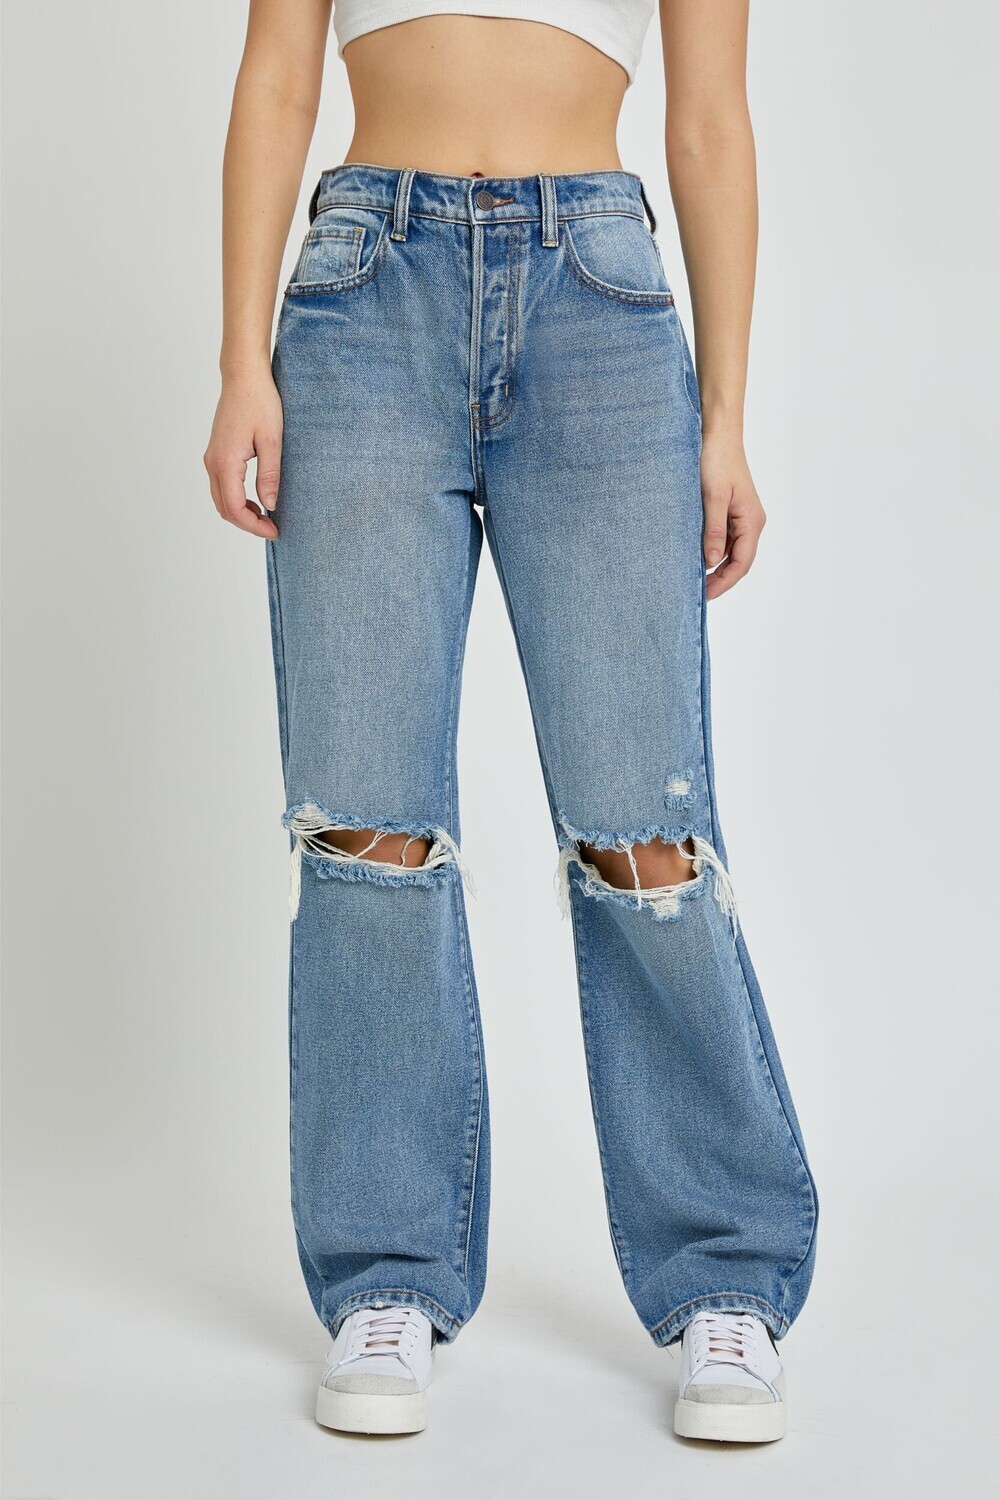 Piper High Rise Dad Jeans